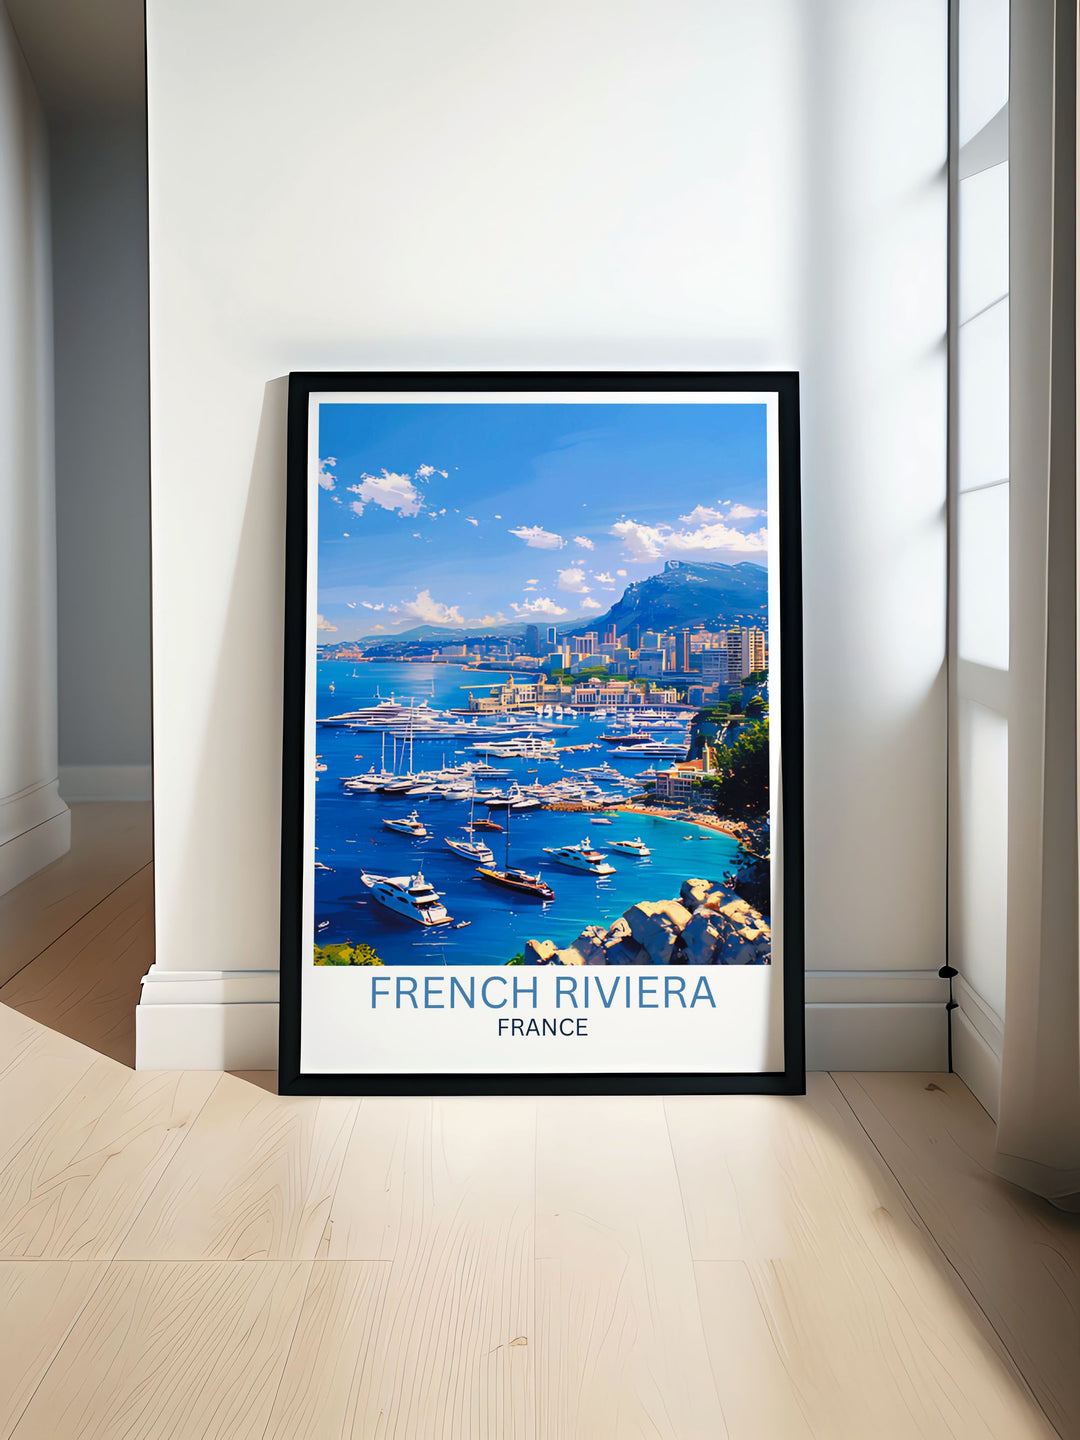 Detailed view of Monaco Monte Carlo with luxurious yachts and the vibrant Mediterranean in the backdrop perfect for enhancing any room decor